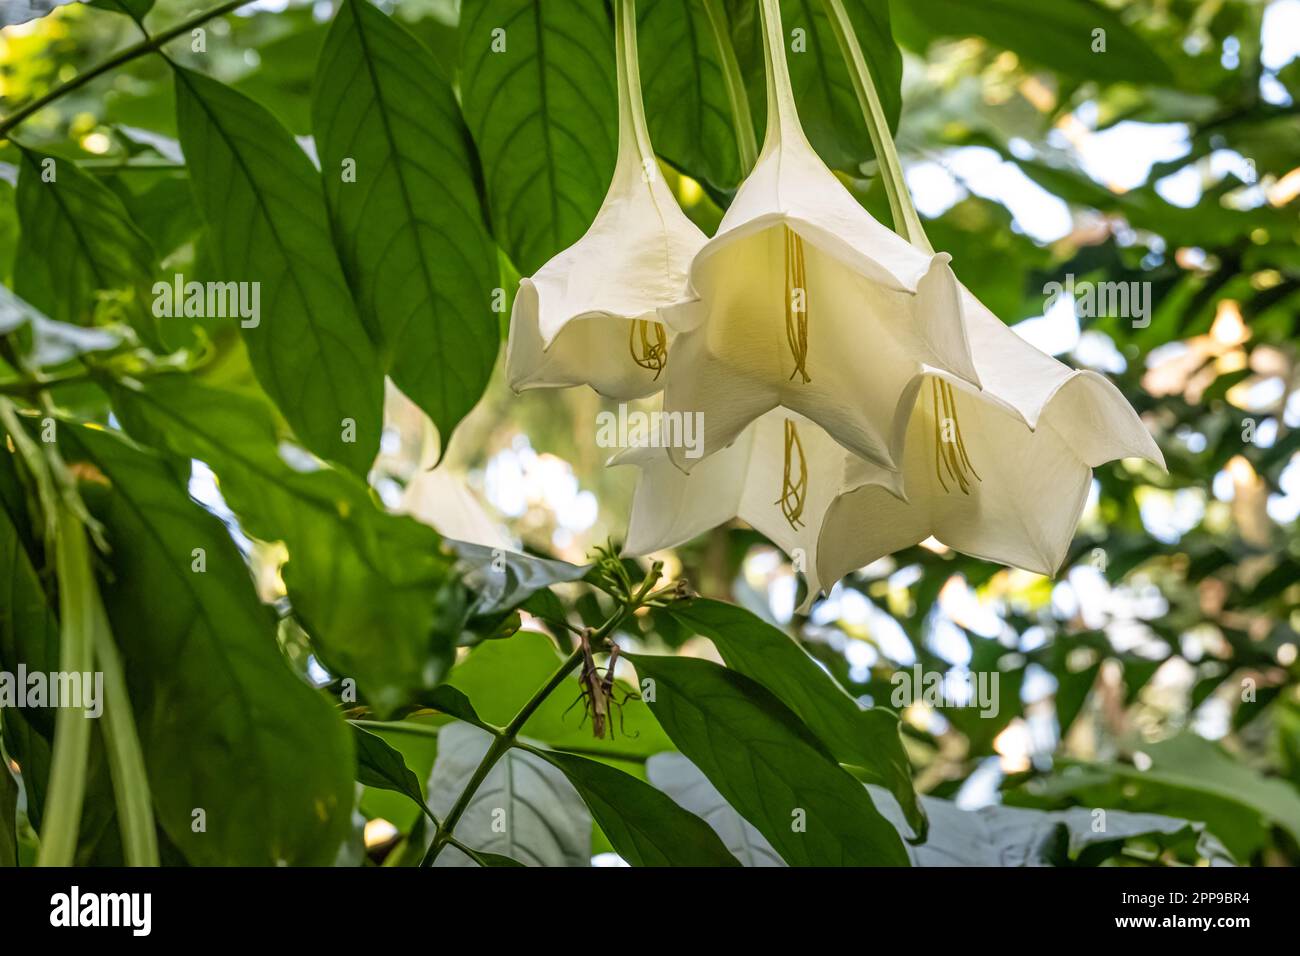 Osa pulchra, a very rare species of tropical plant with pendent, trumpet-shaped, fragrant white flowers at the Atlanta Botanical Garden in Atlanta, GA. Stock Photo